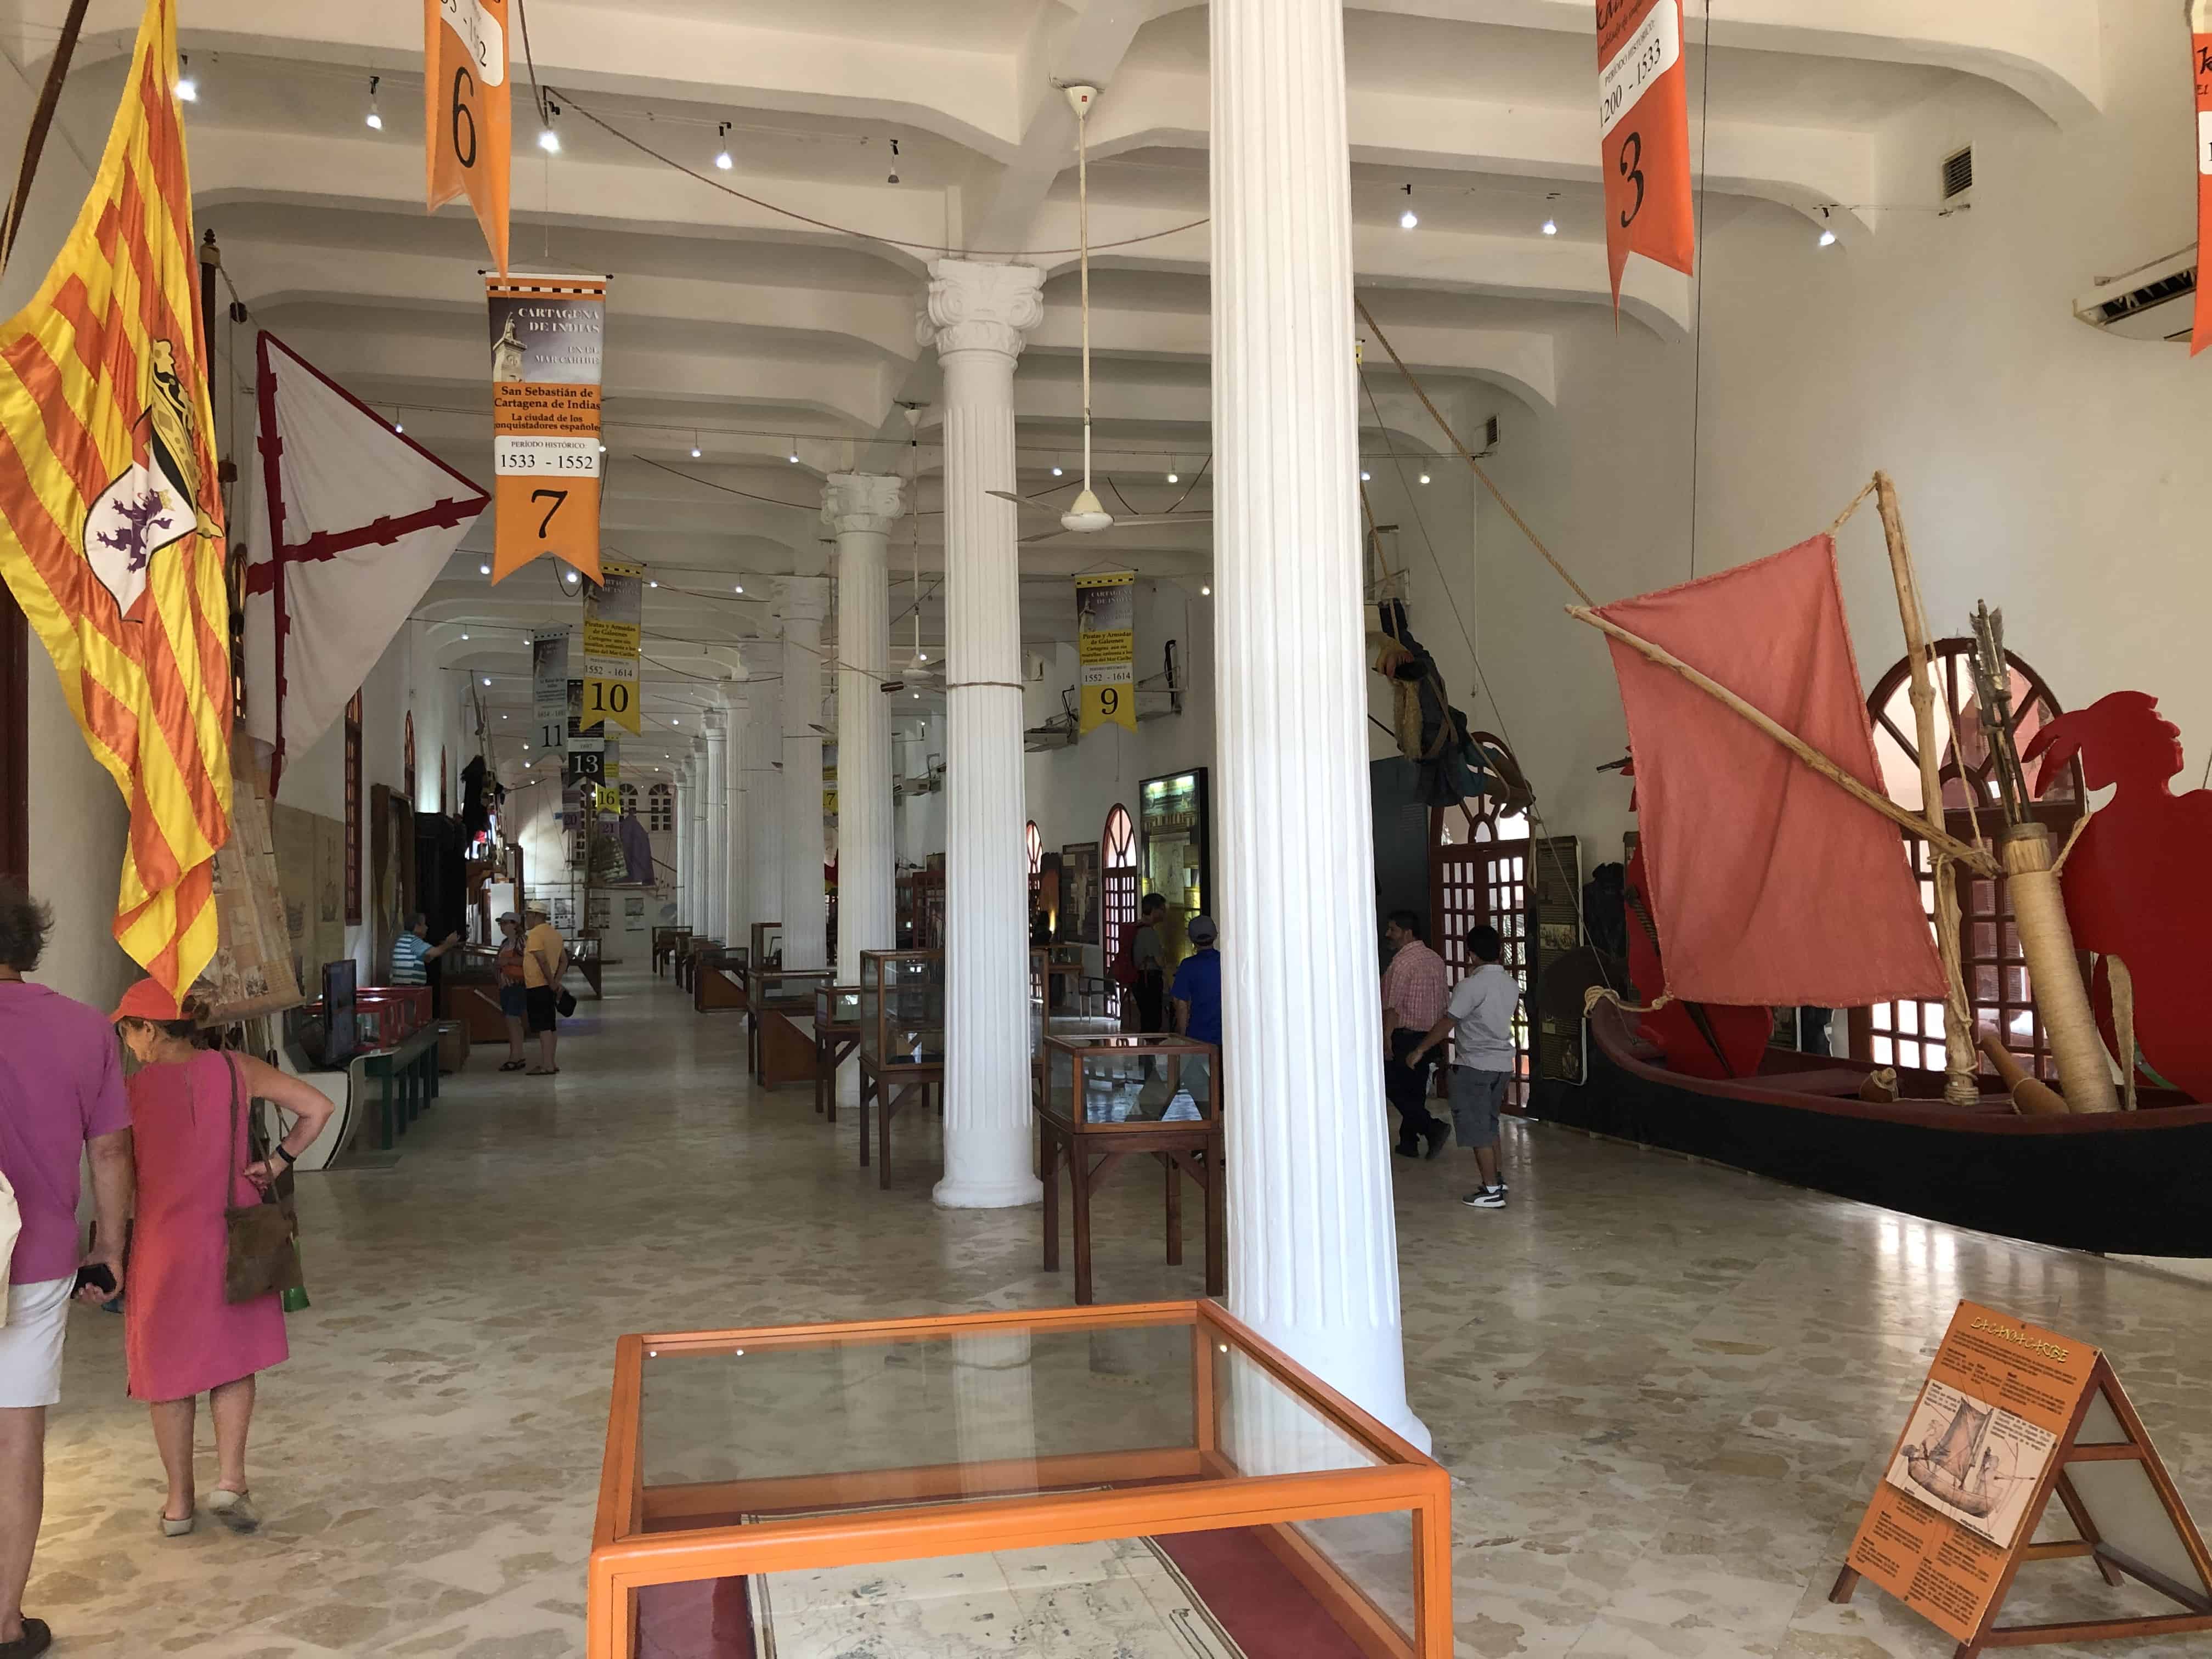 Ground floor at the Caribbean Naval Museum in Cartagena, Colombia